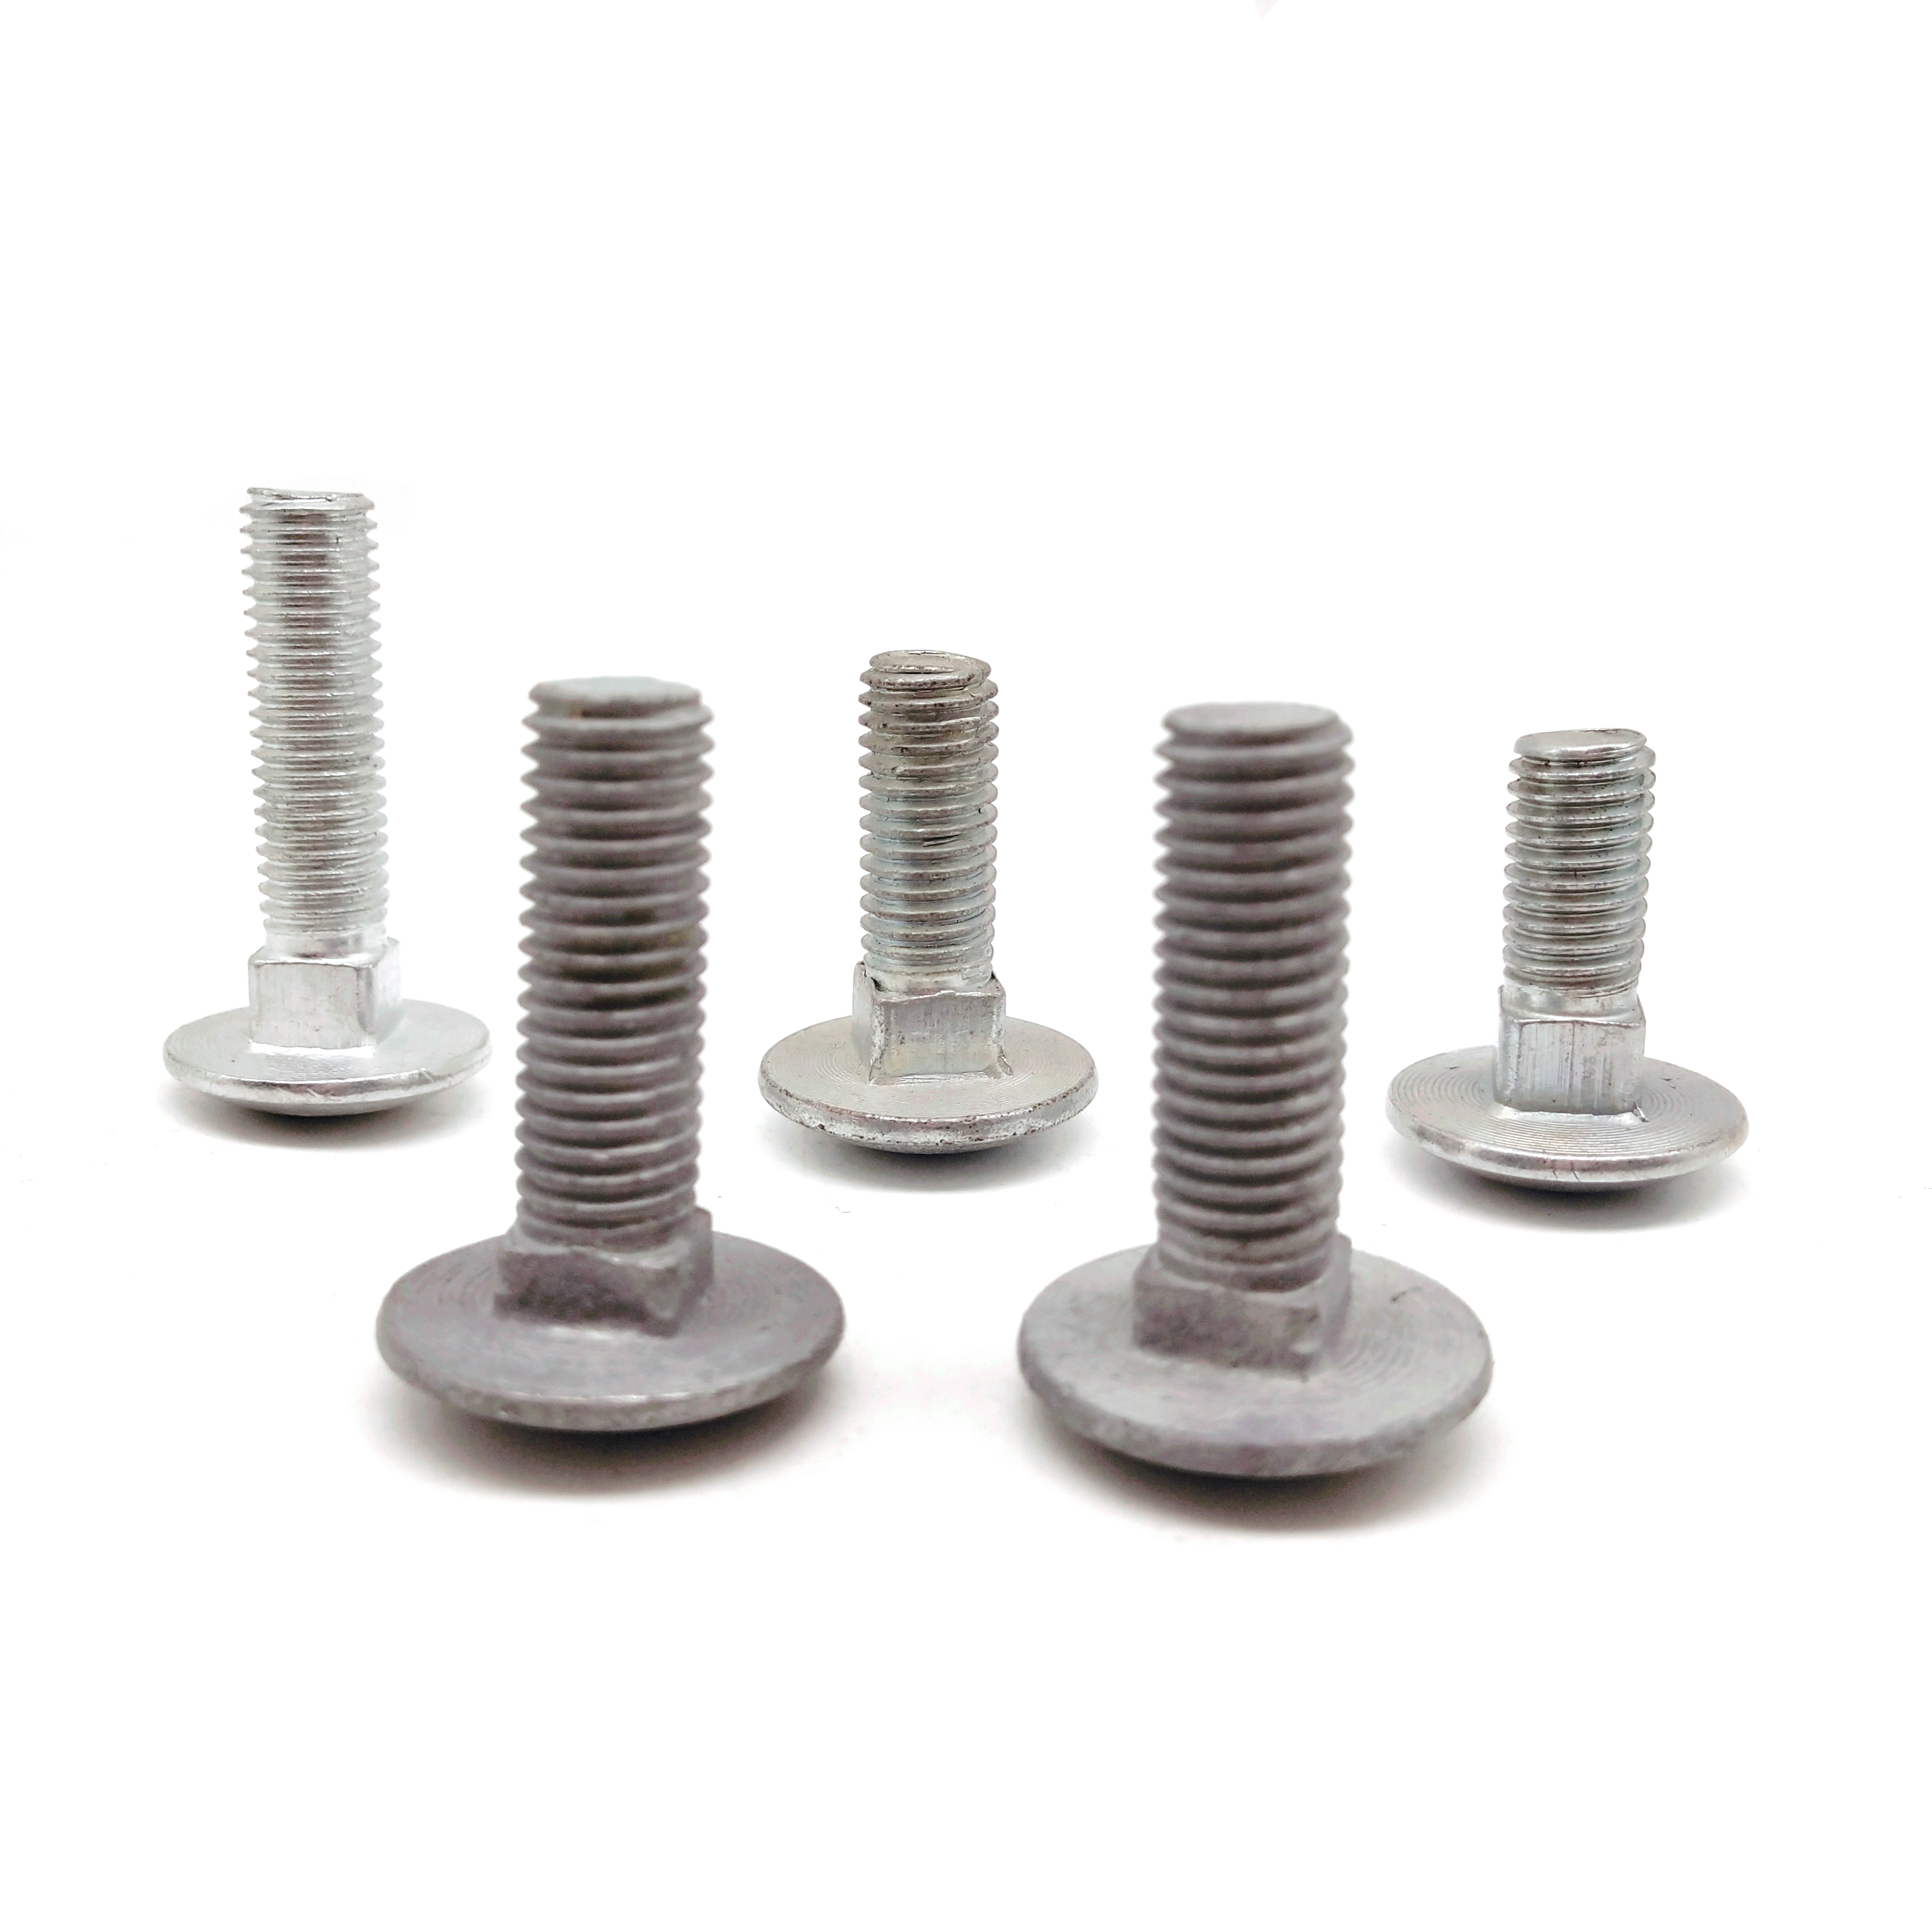 DIN603 stainless steel carbon steel carriage bolt and nut